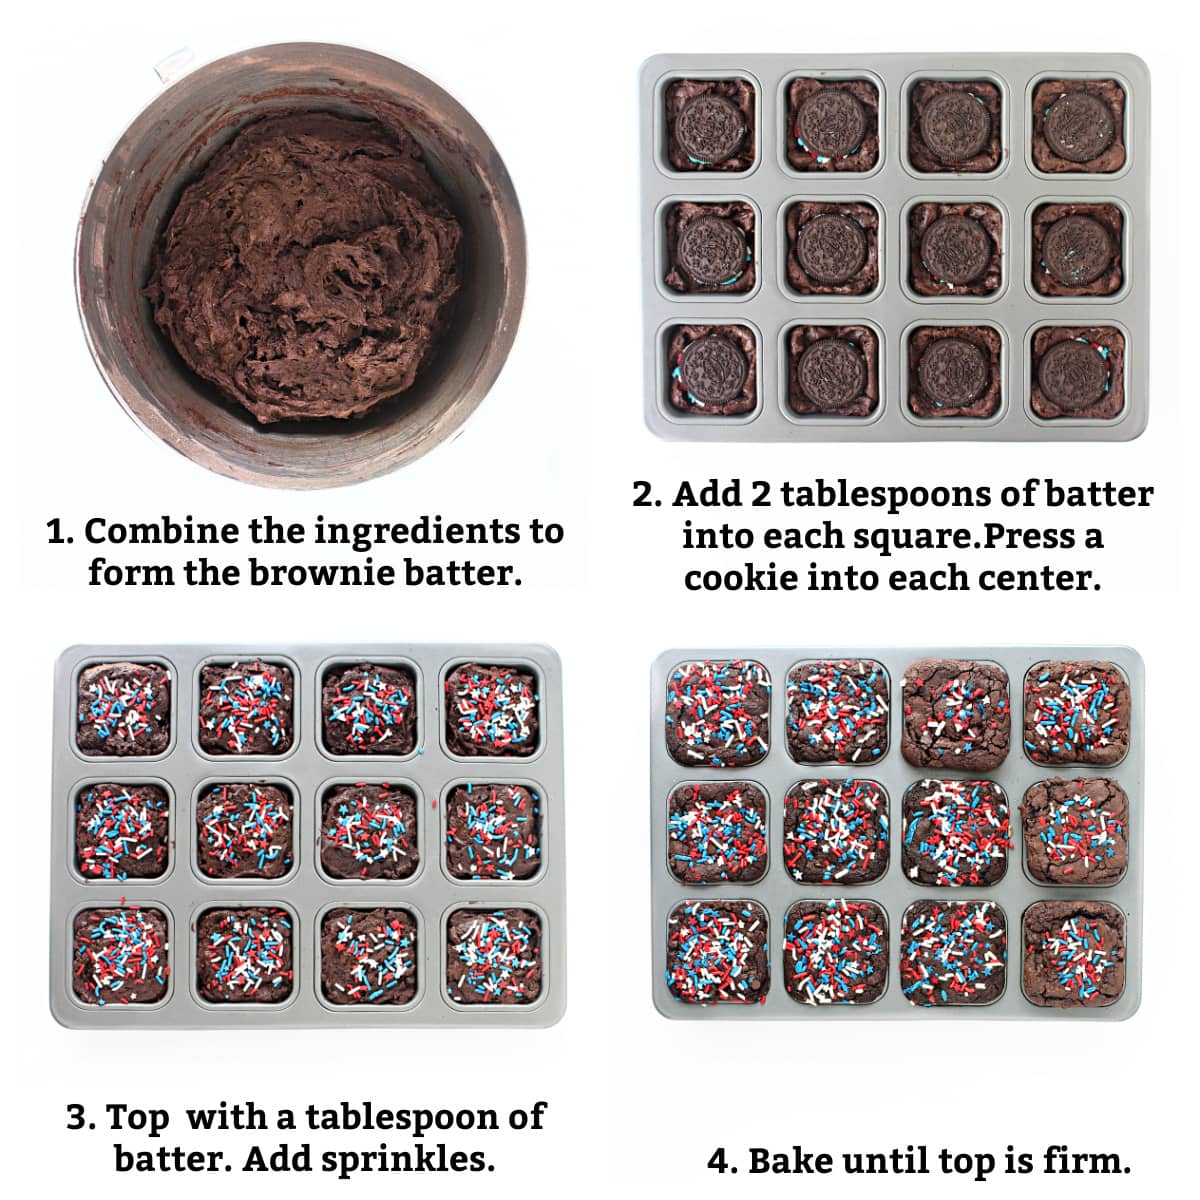 Brownie instructions: make batter, add half to pan, press in cookies, top with remaining batter and sprinkles, bake.